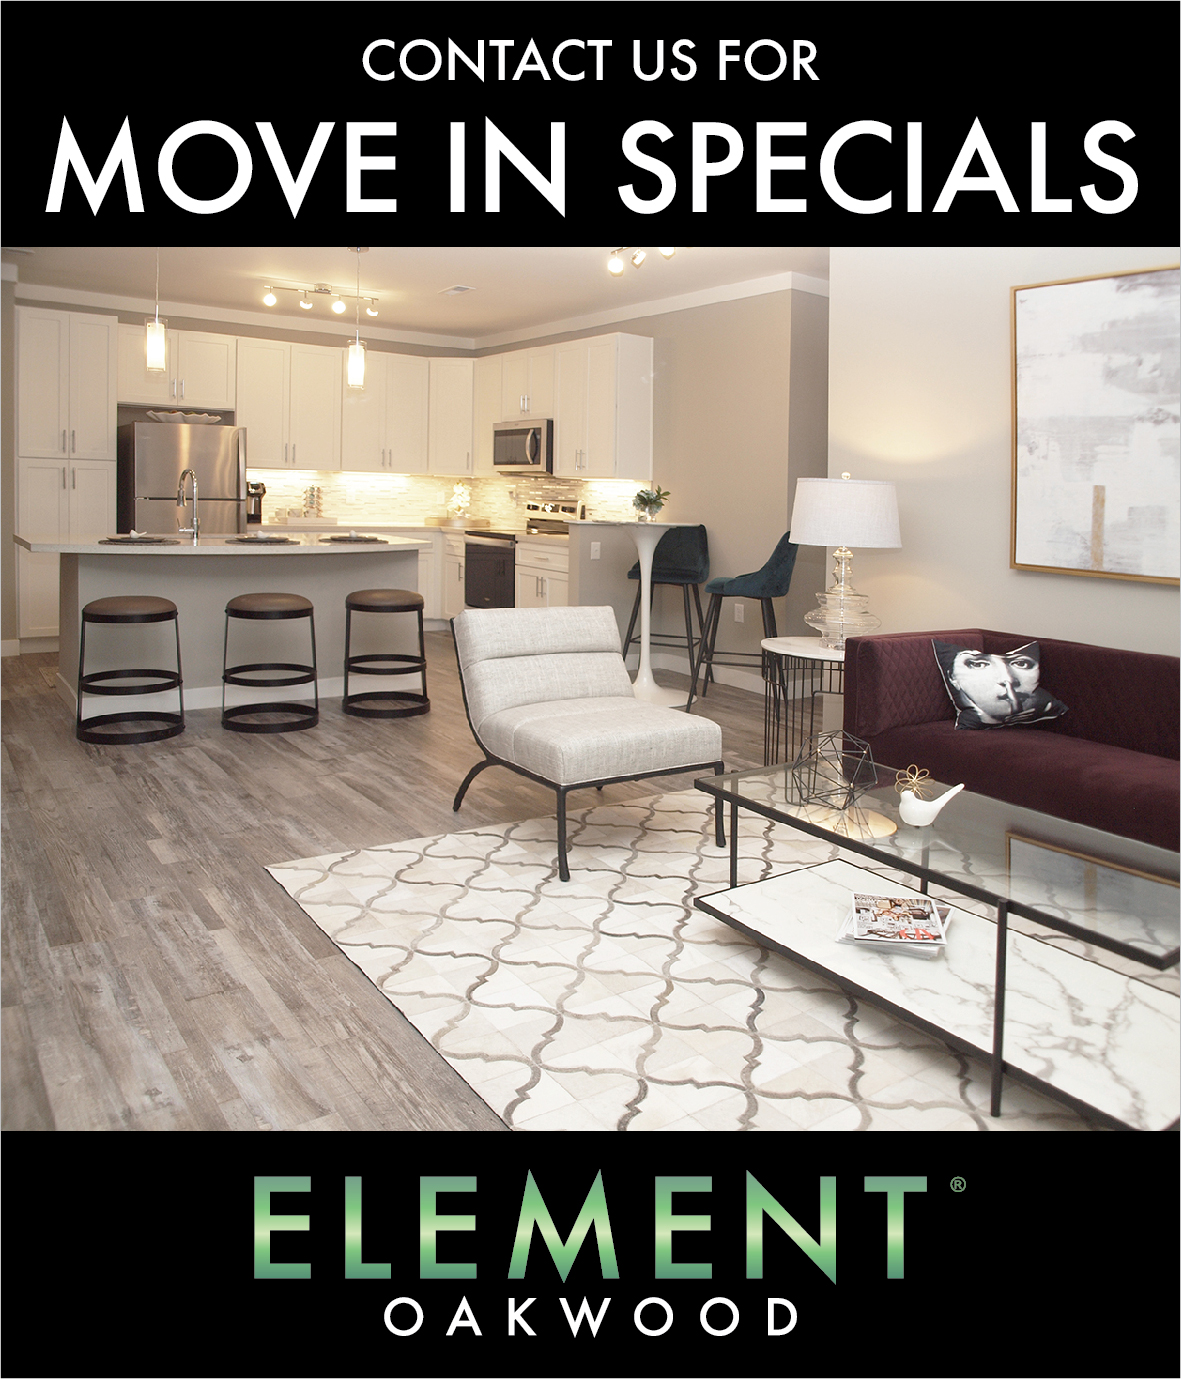 Contact us for move-in specials!